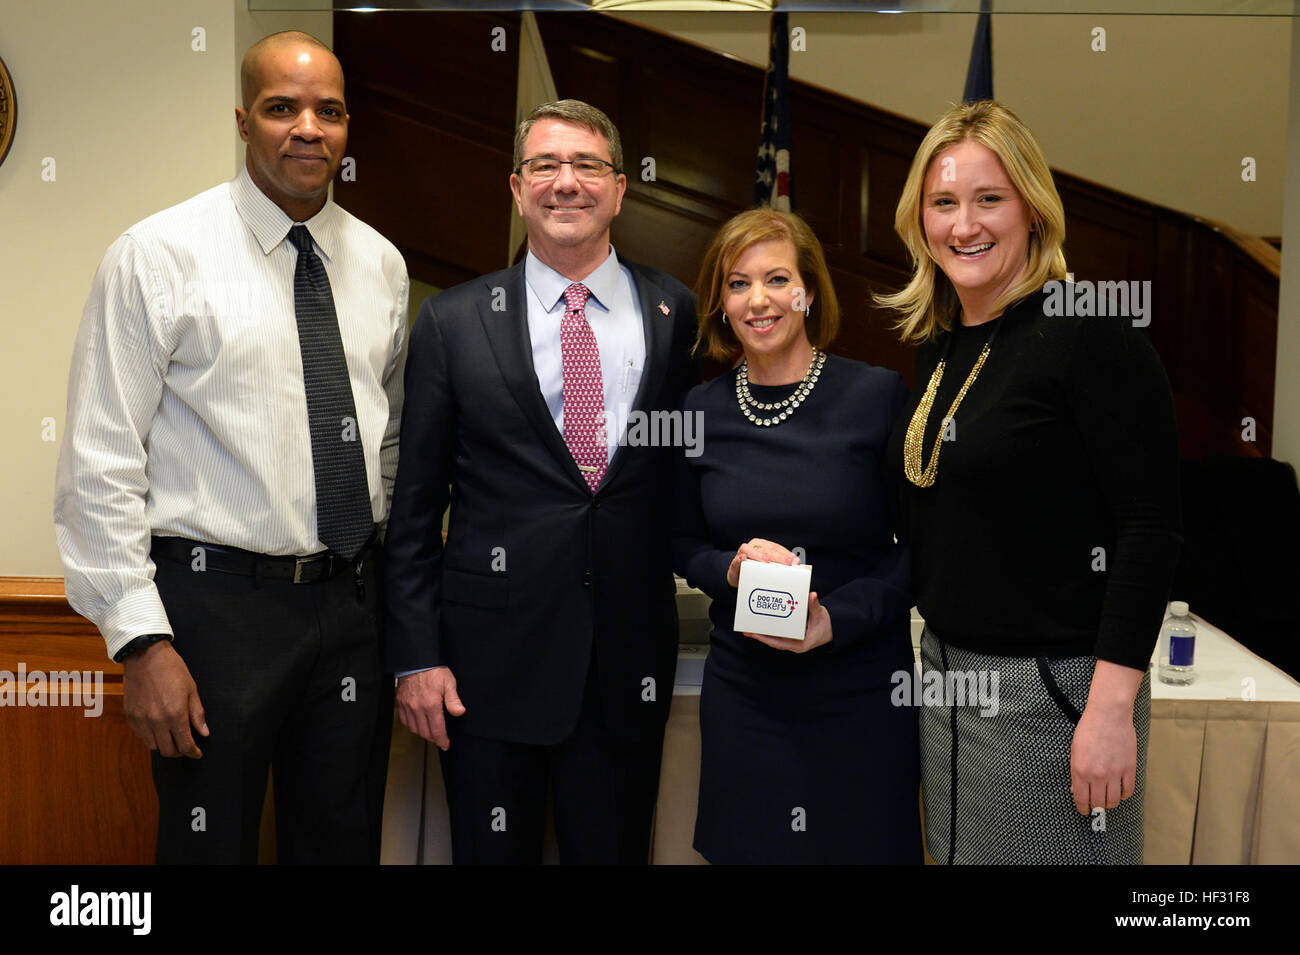 Secretary of Defense Ash Carter and his wife Stephanie pose for a photo with members of the Dog Tag Bakery at the Pentagon March 6, 2015, during a swearing in ceremony reception in honor of Secretary Carter. (Photo by Master Sgt. Adrian Cadiz/Released) SD swearing in ceremony 150306-D-DT527-392 Stock Photo